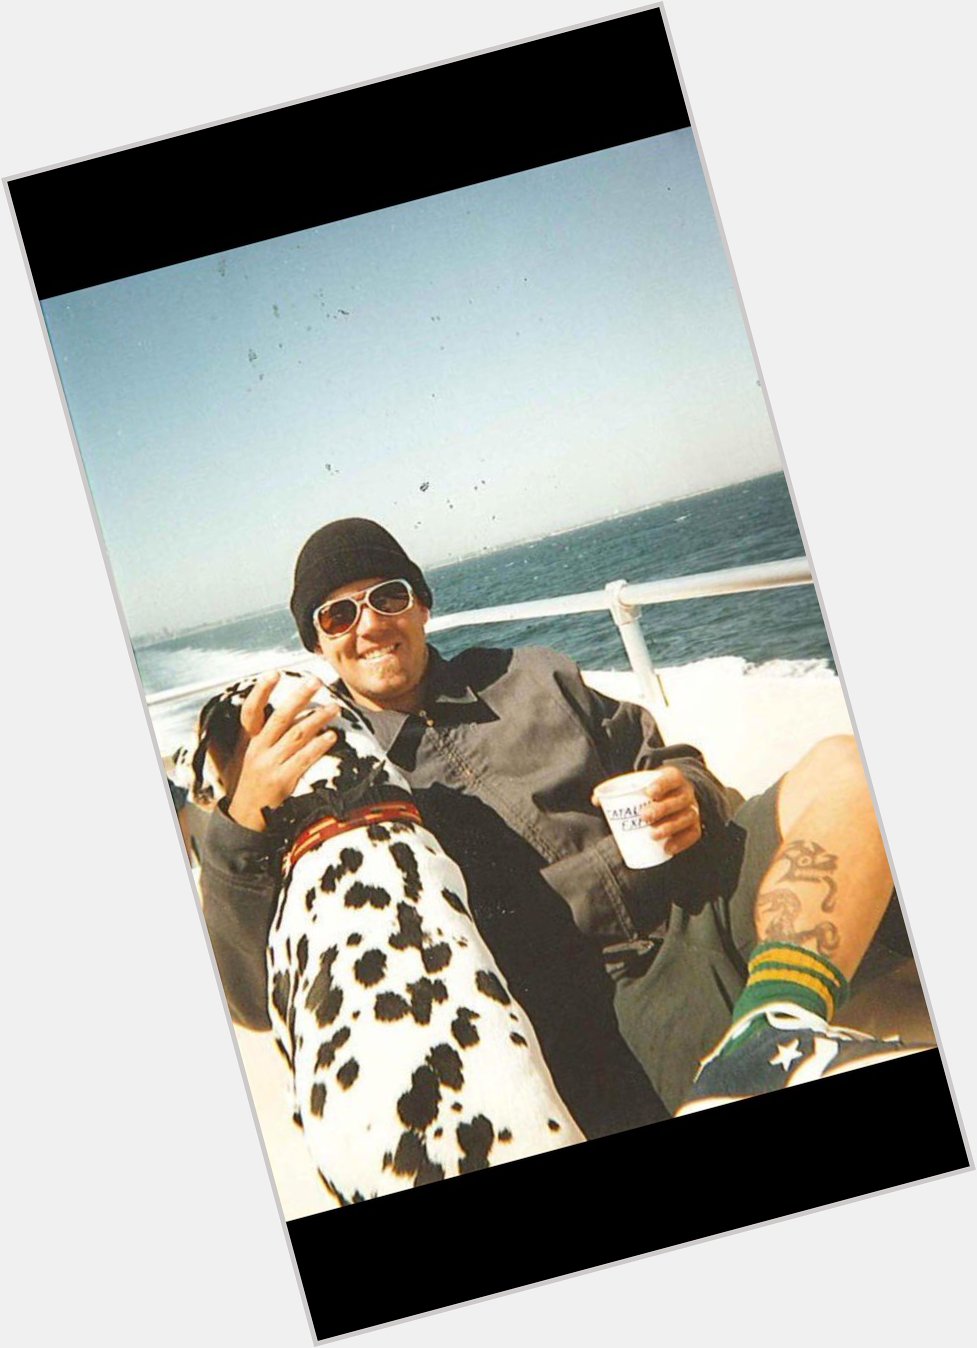 Happy birthday to the great Bradley Nowell of Sublime... gone but never forgotten 